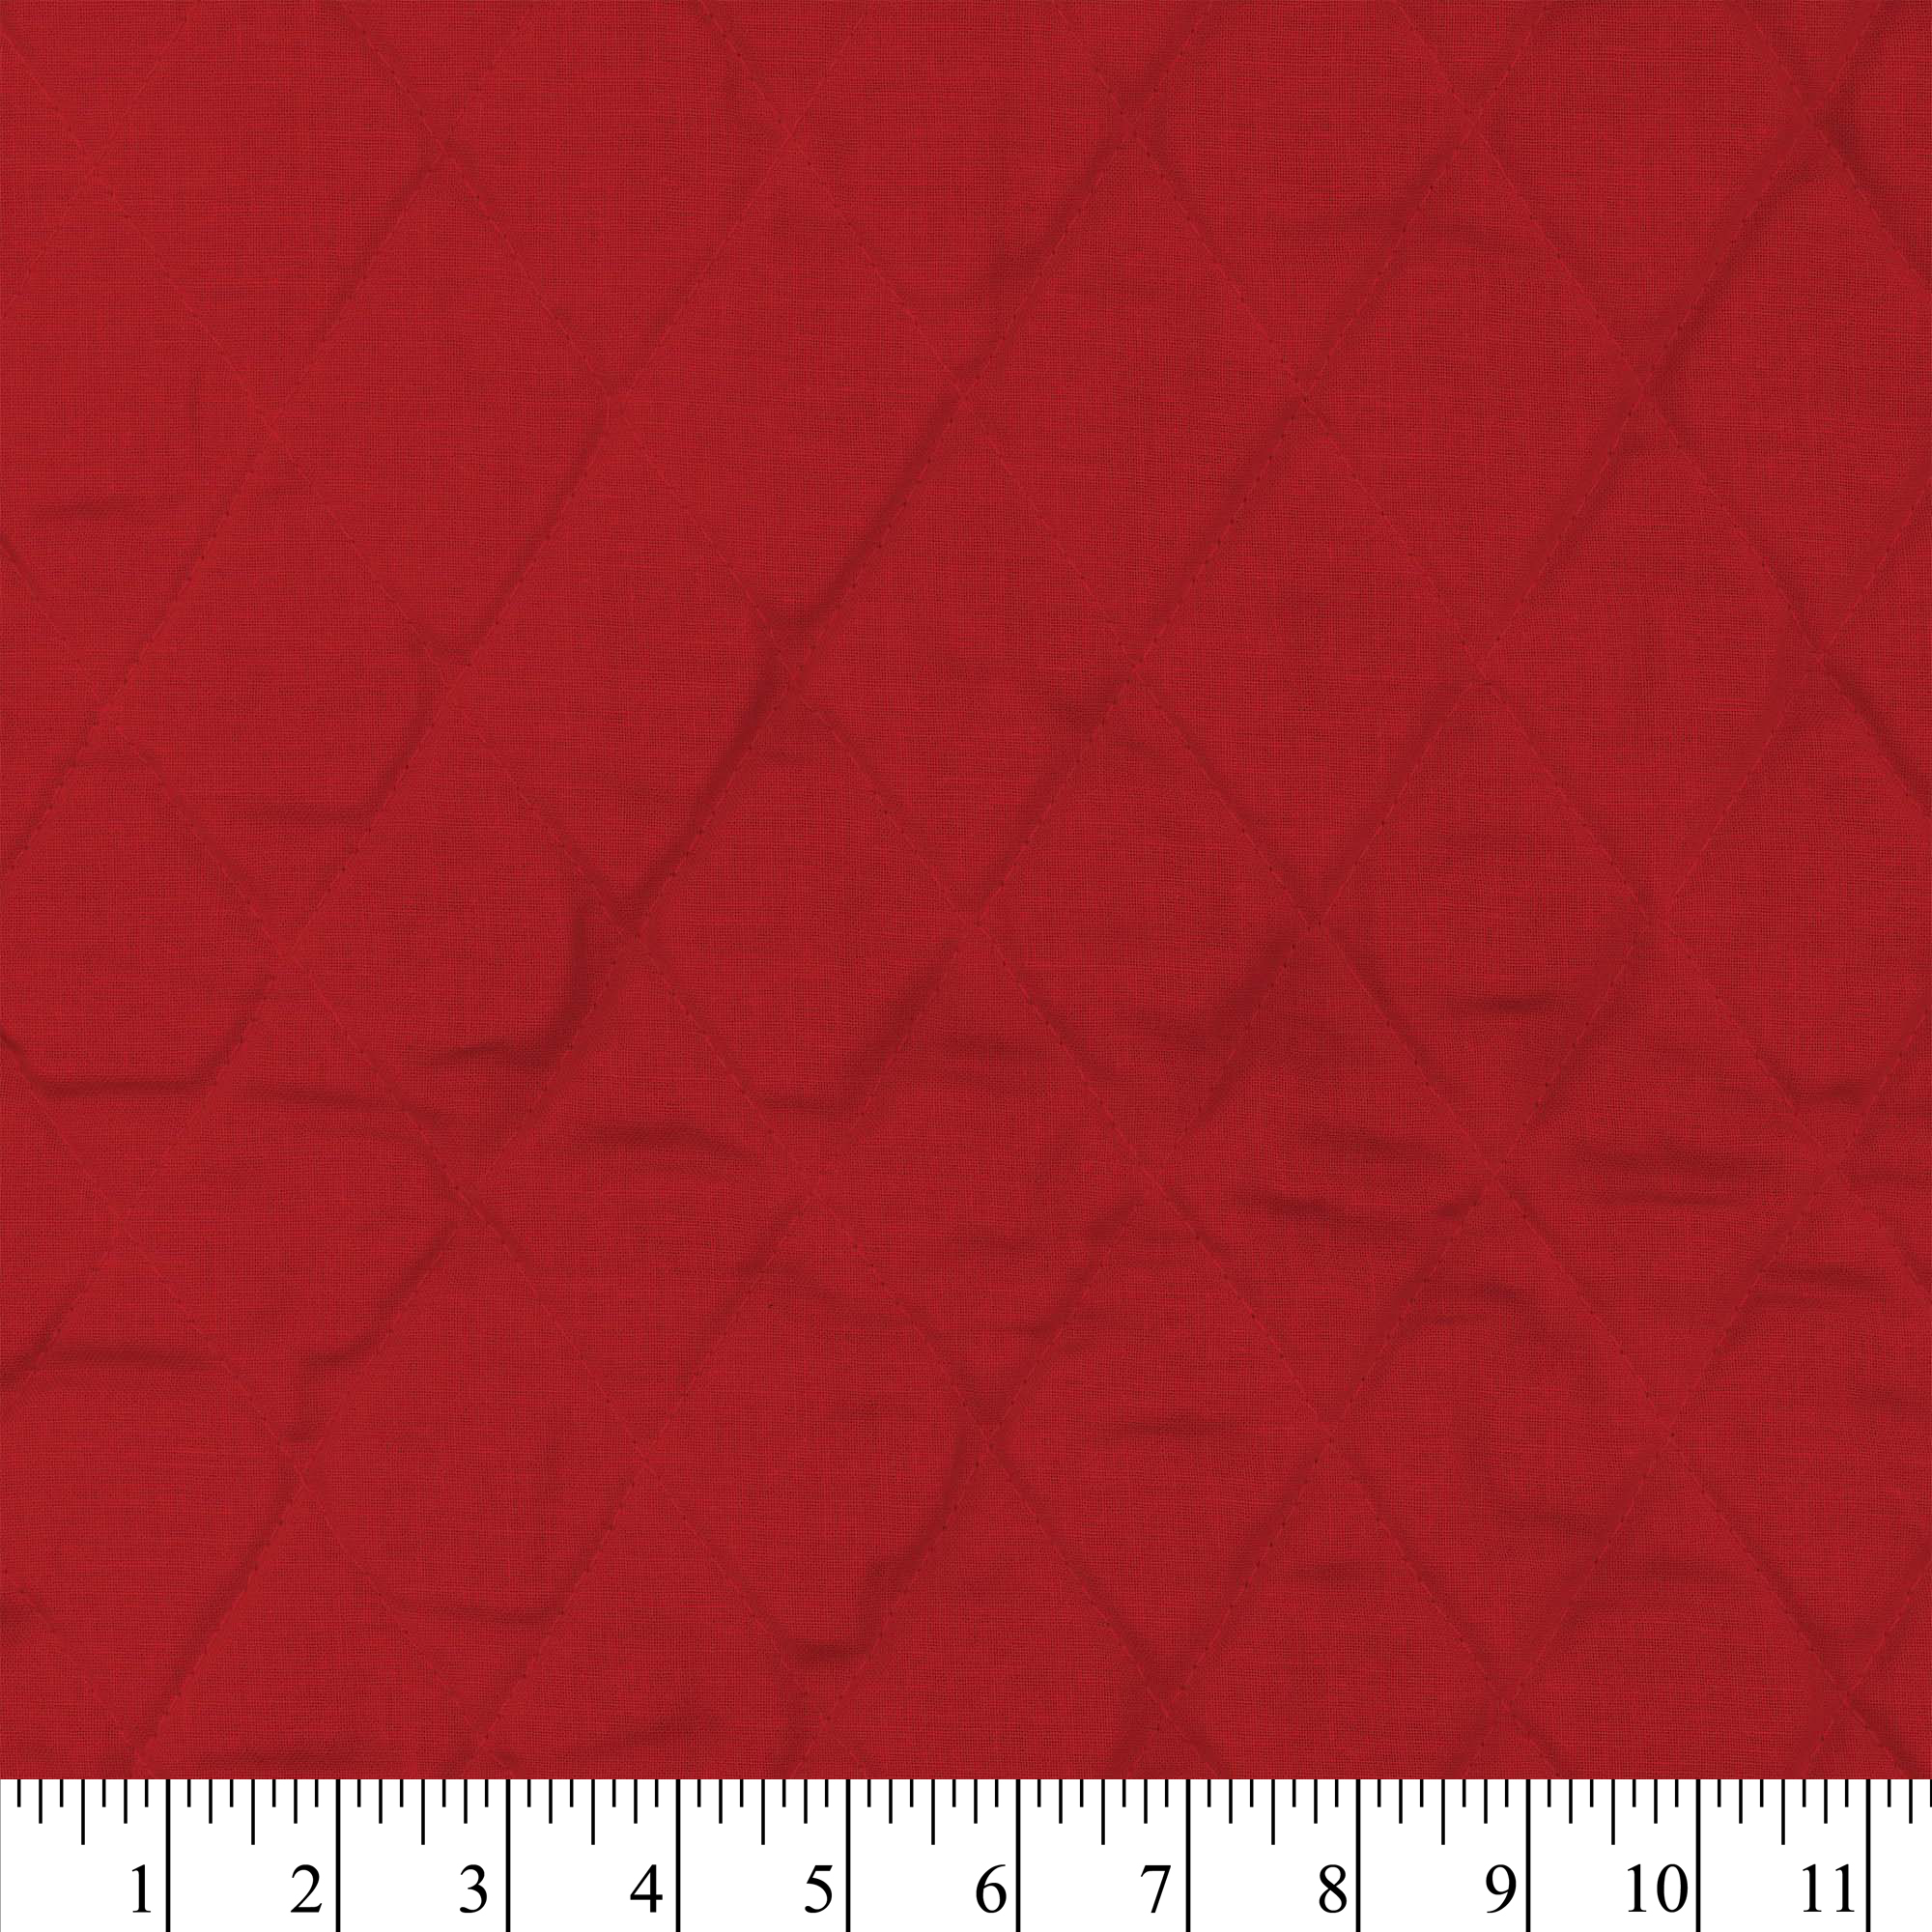 David Textiles 42 inch Cotton Double-Faced Quilt Solid Fabric by The Yard, Red